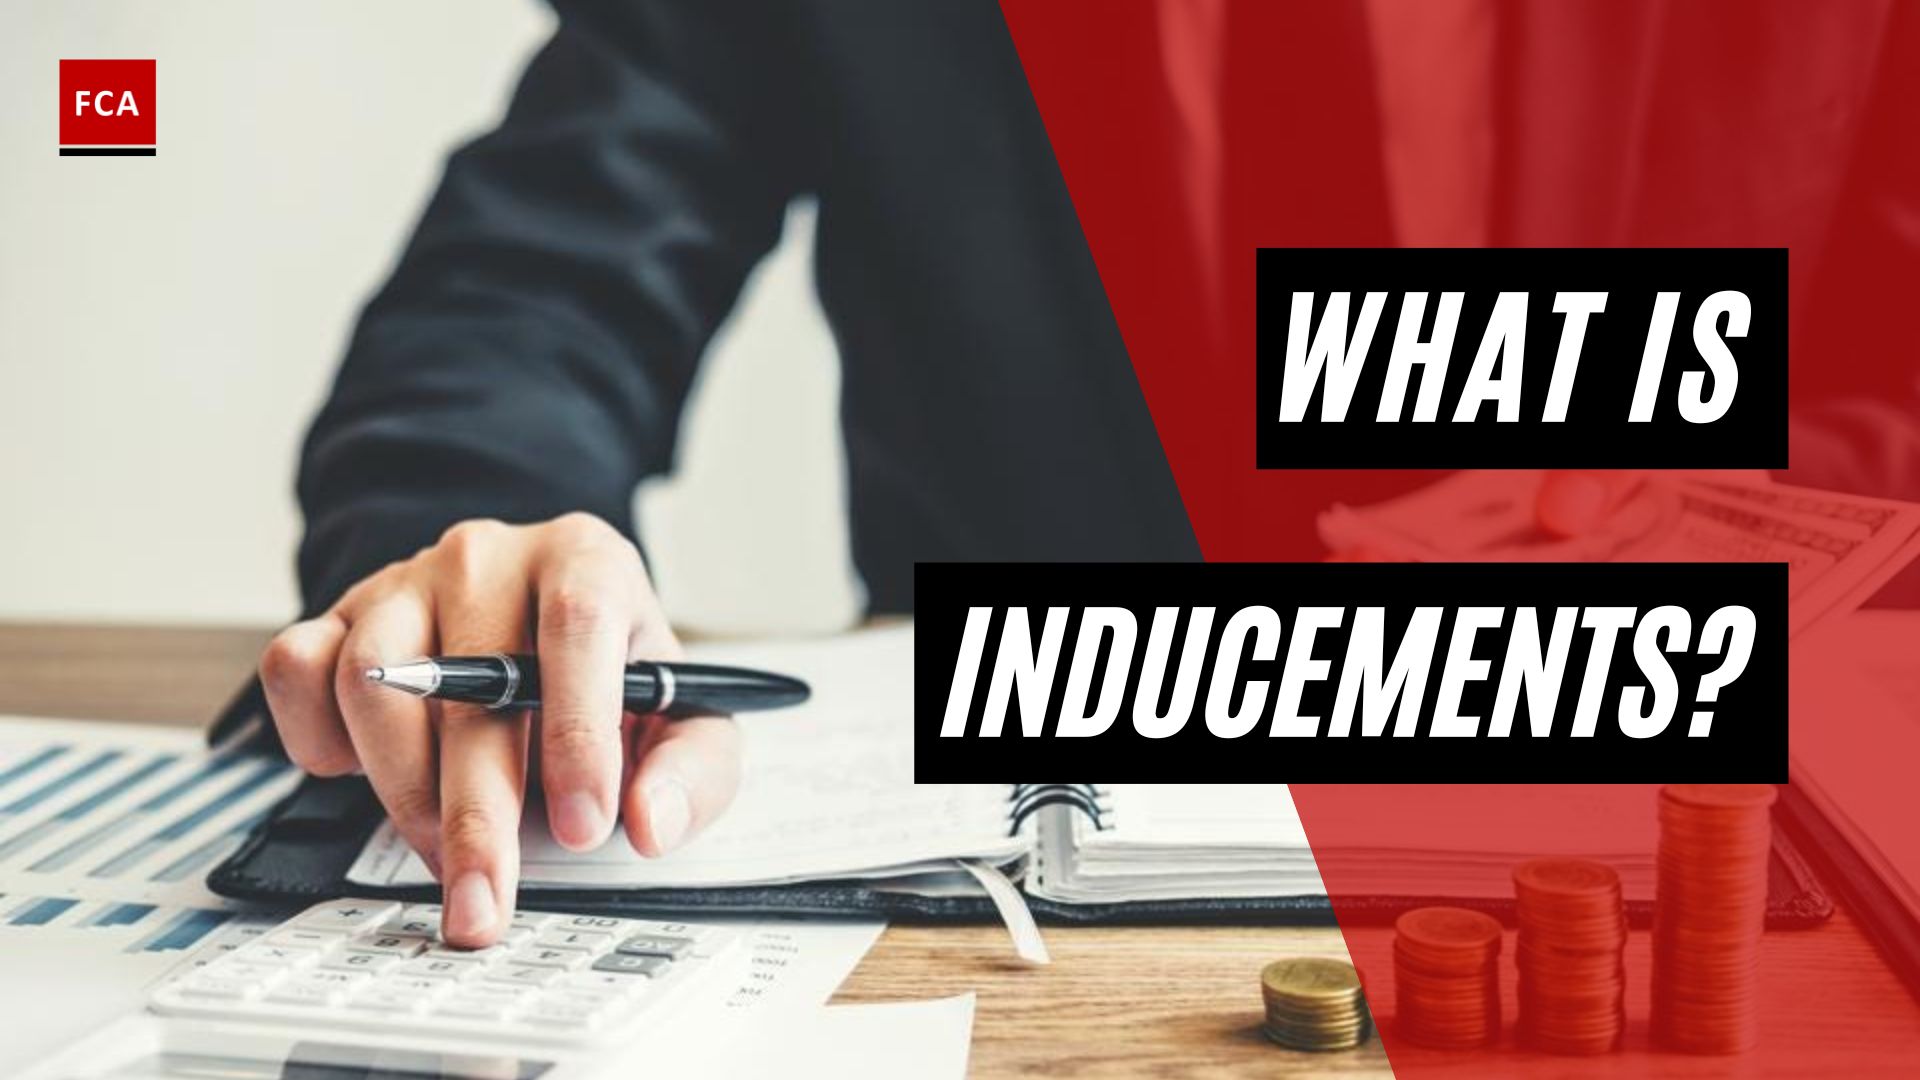 What Is Inducements?